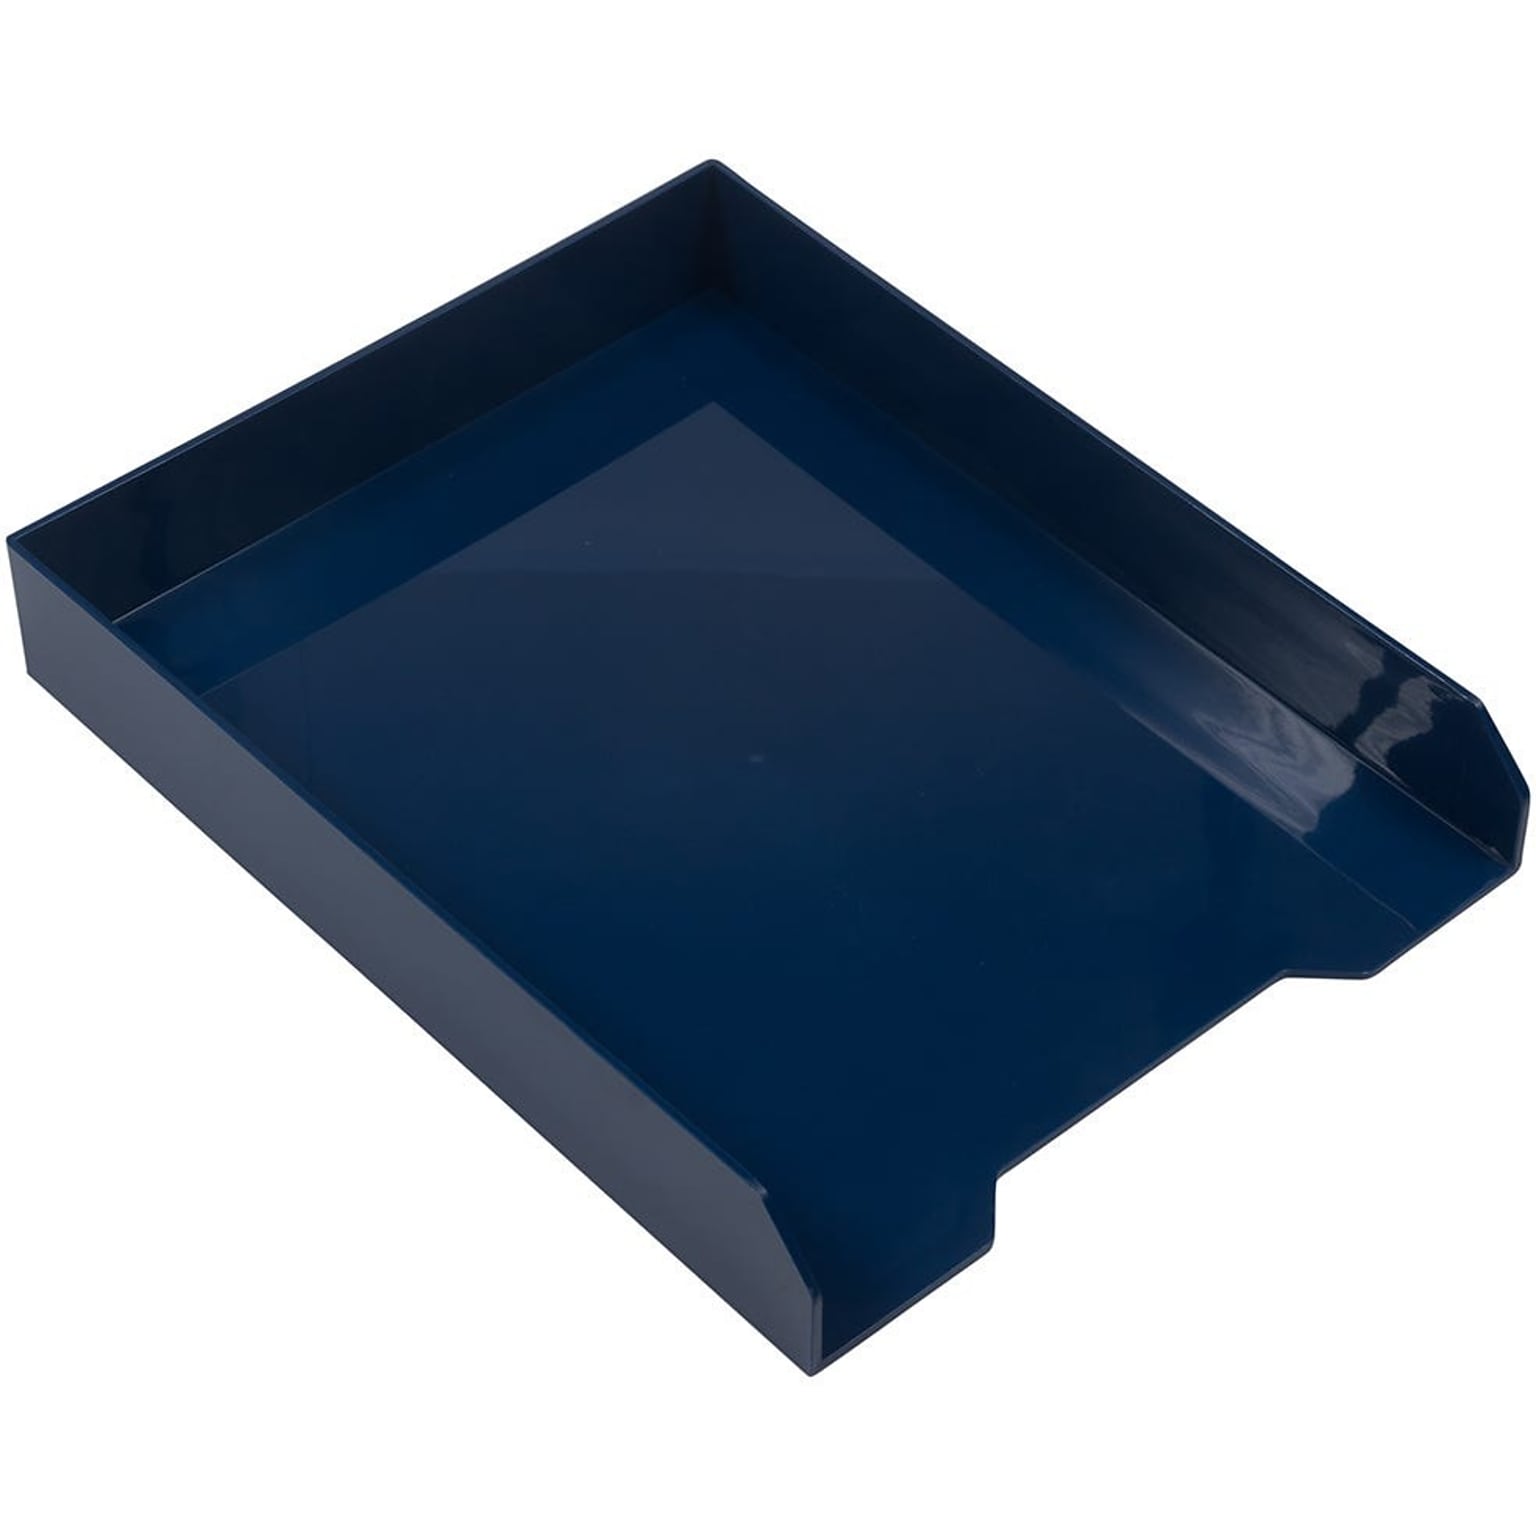 JAM PAPER Stackable Paper Trays, Navy Blue, Desktop Document, Letter, & File Organizer Tray, 2/Pack (344naas)